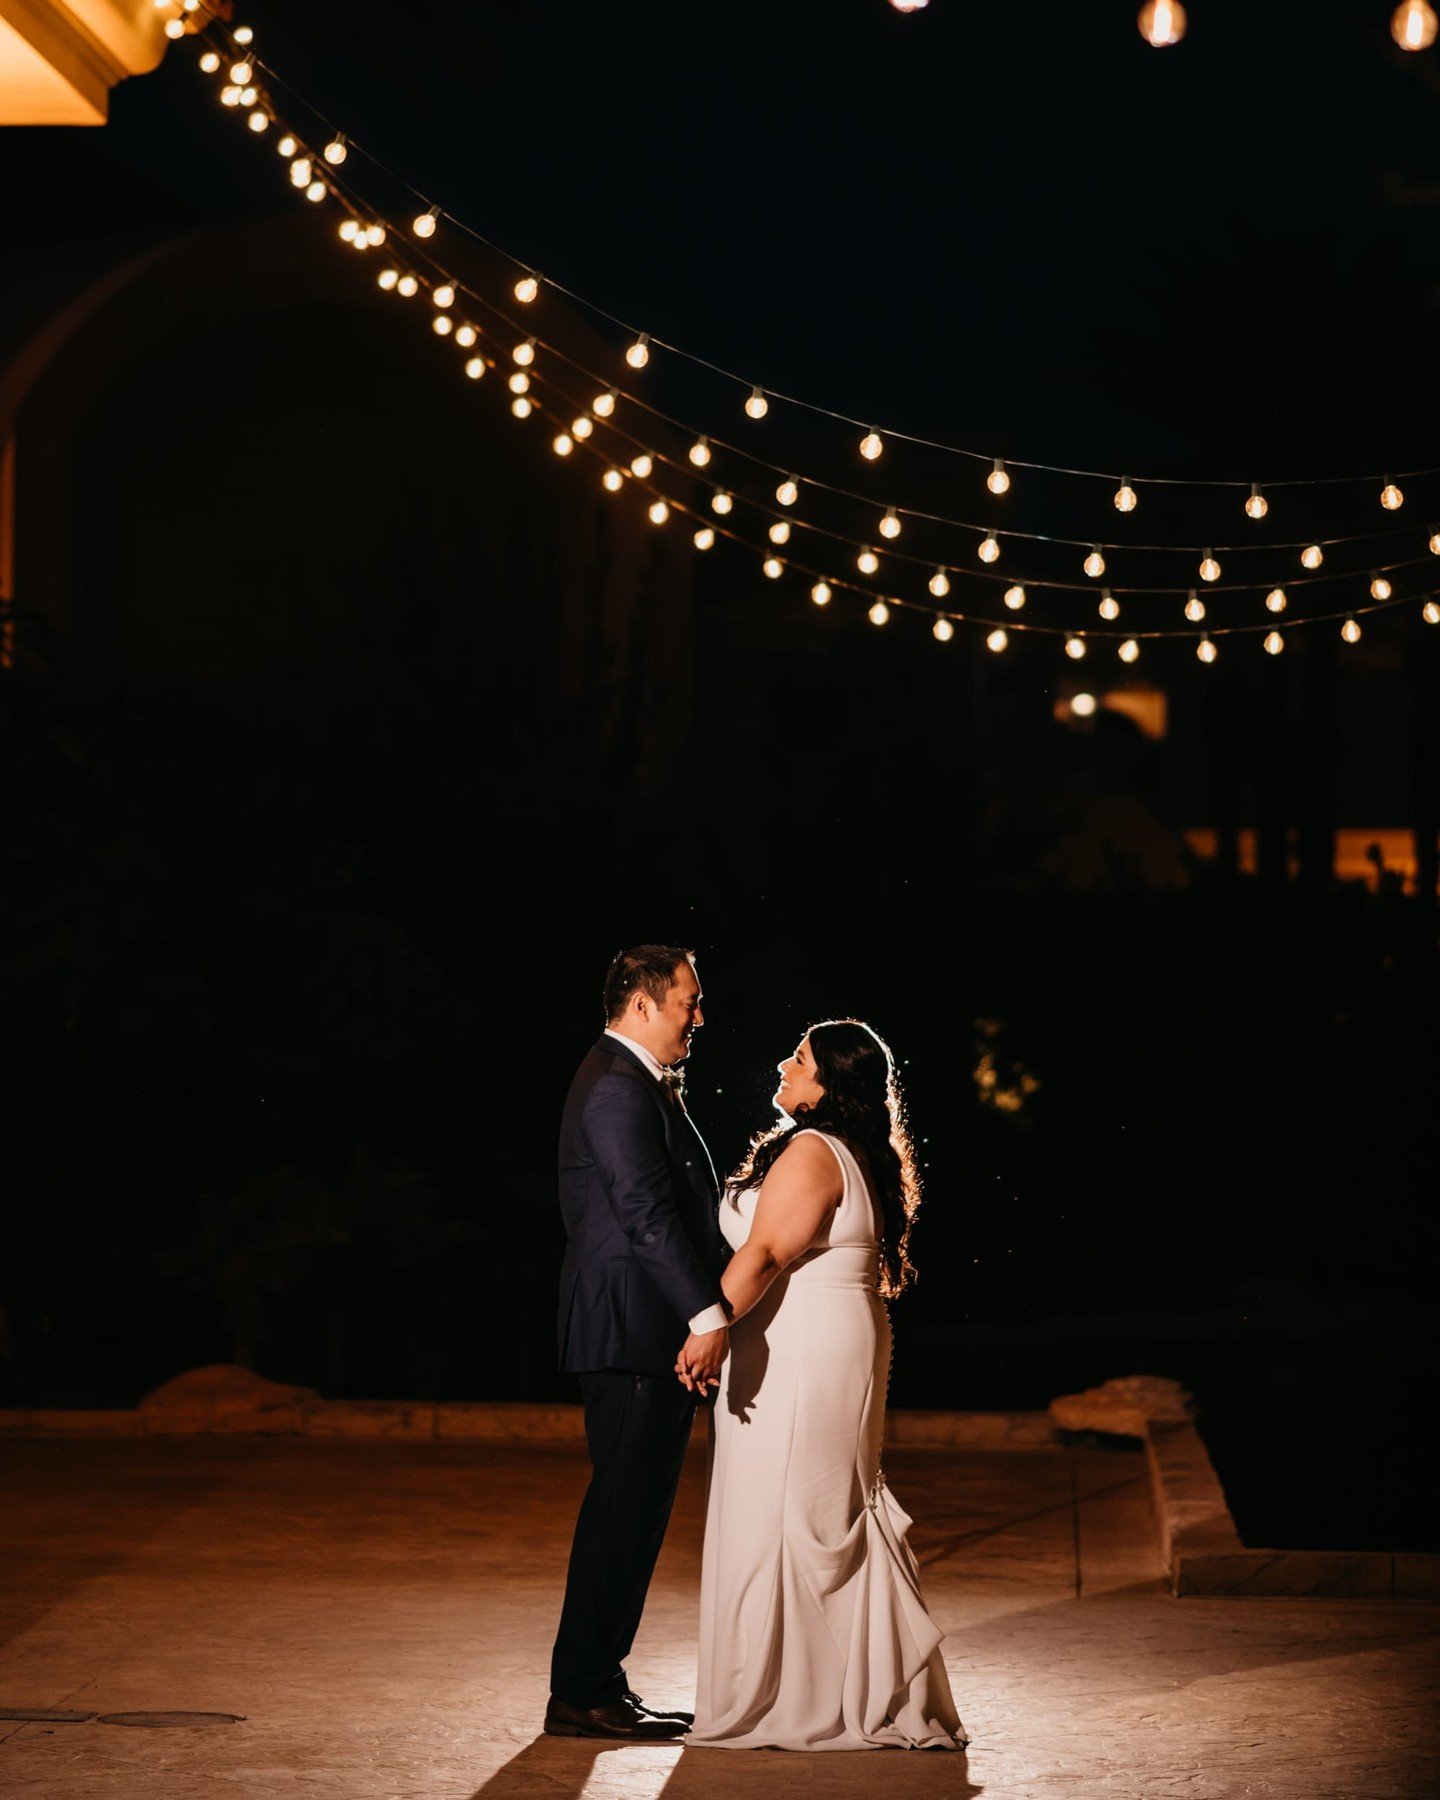 I mostly photograph elopements these days, but one thing I'll never say no to is a beautiful wedding celebration. And usually, by spending all day and night together, you'll end up with some fun and creative nighttime portraits like this one! Plus, w